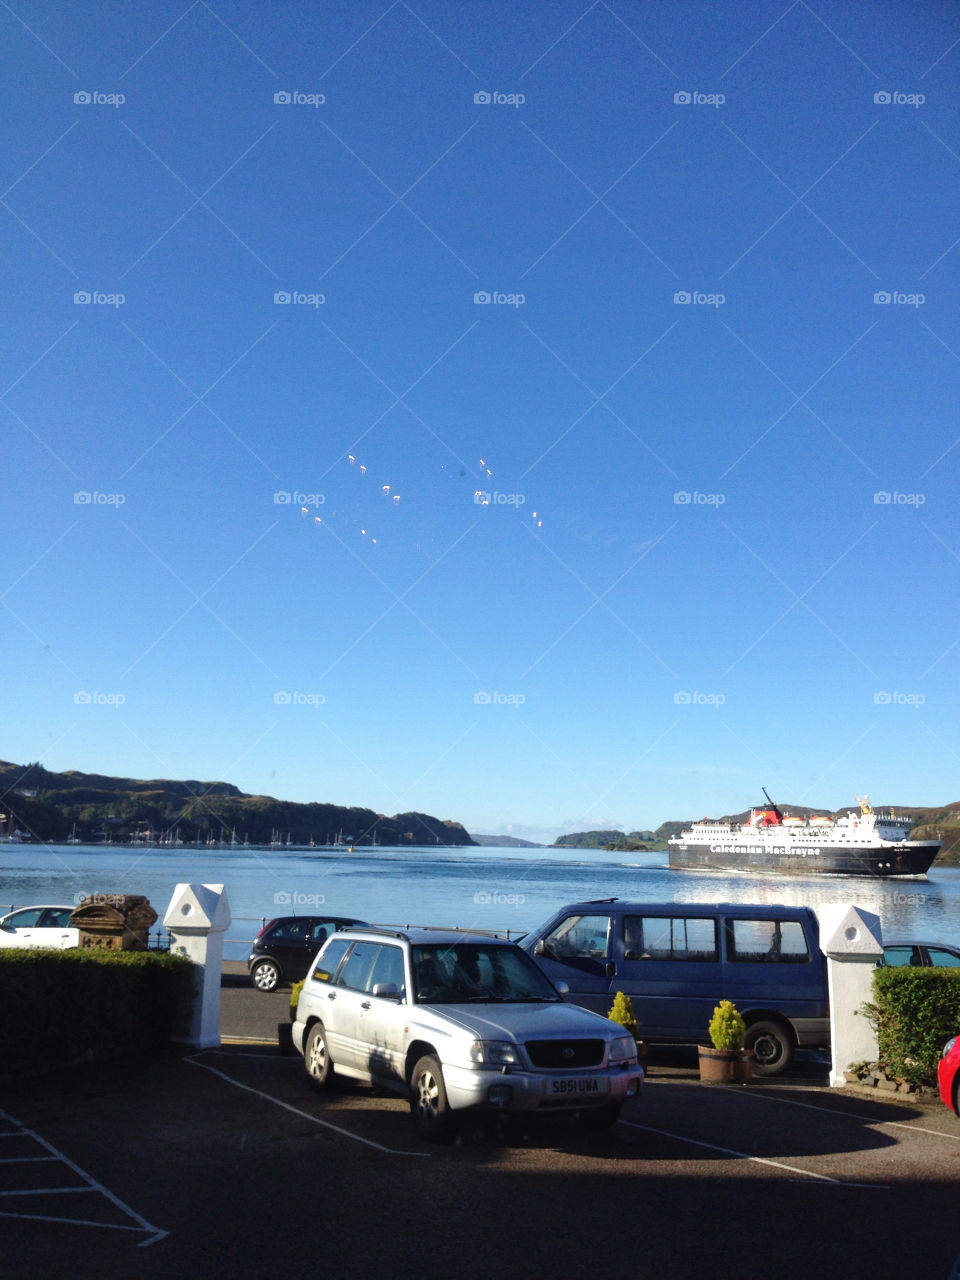 oban scotland oban view from hotel lights are a mystery by louisa